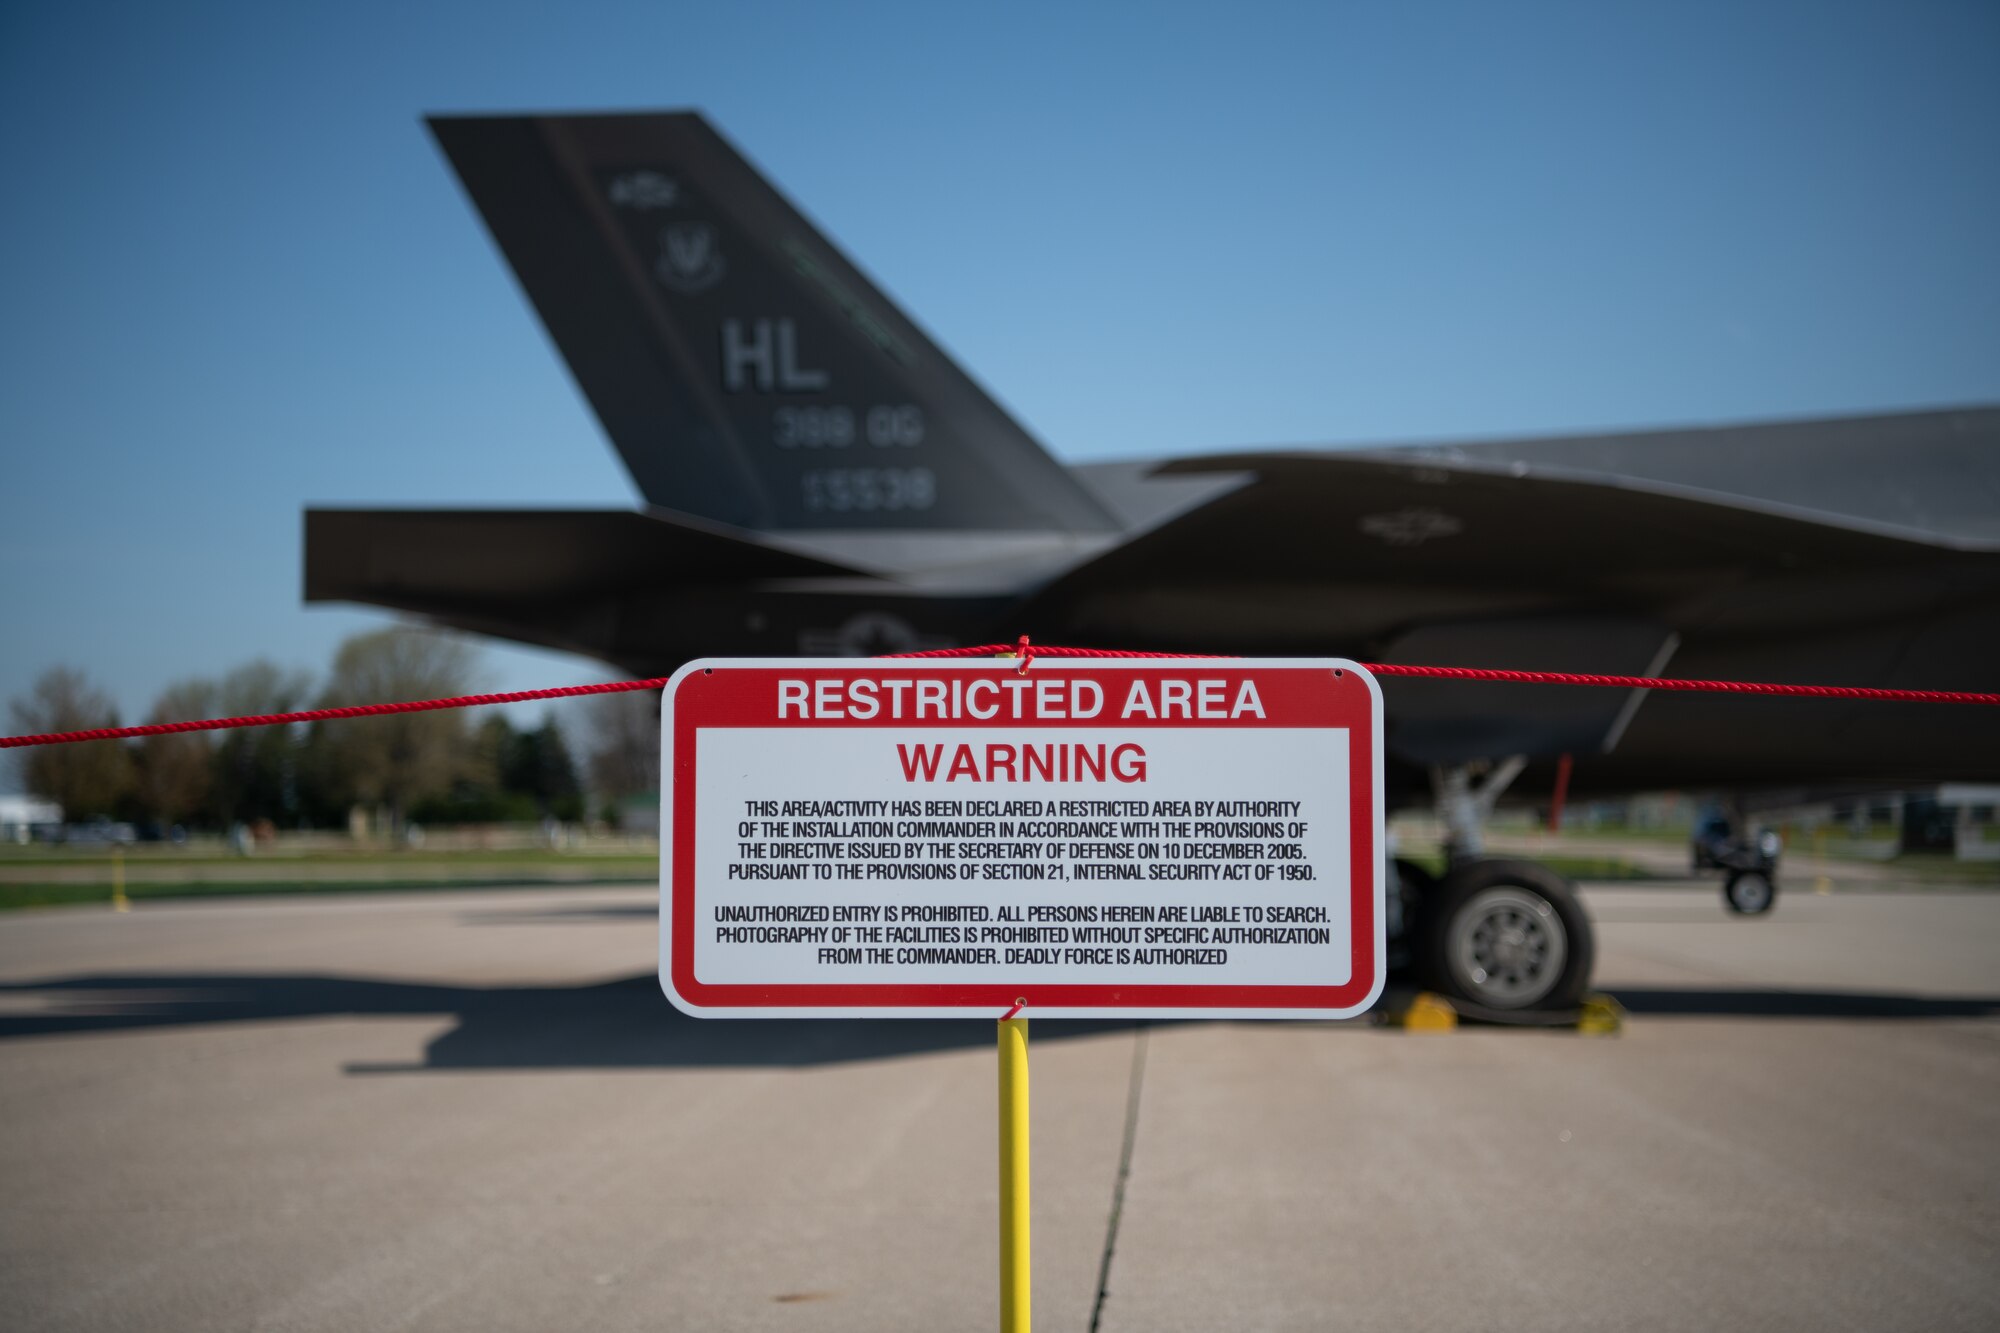 An F-35 Lightning II aircraft is on static display